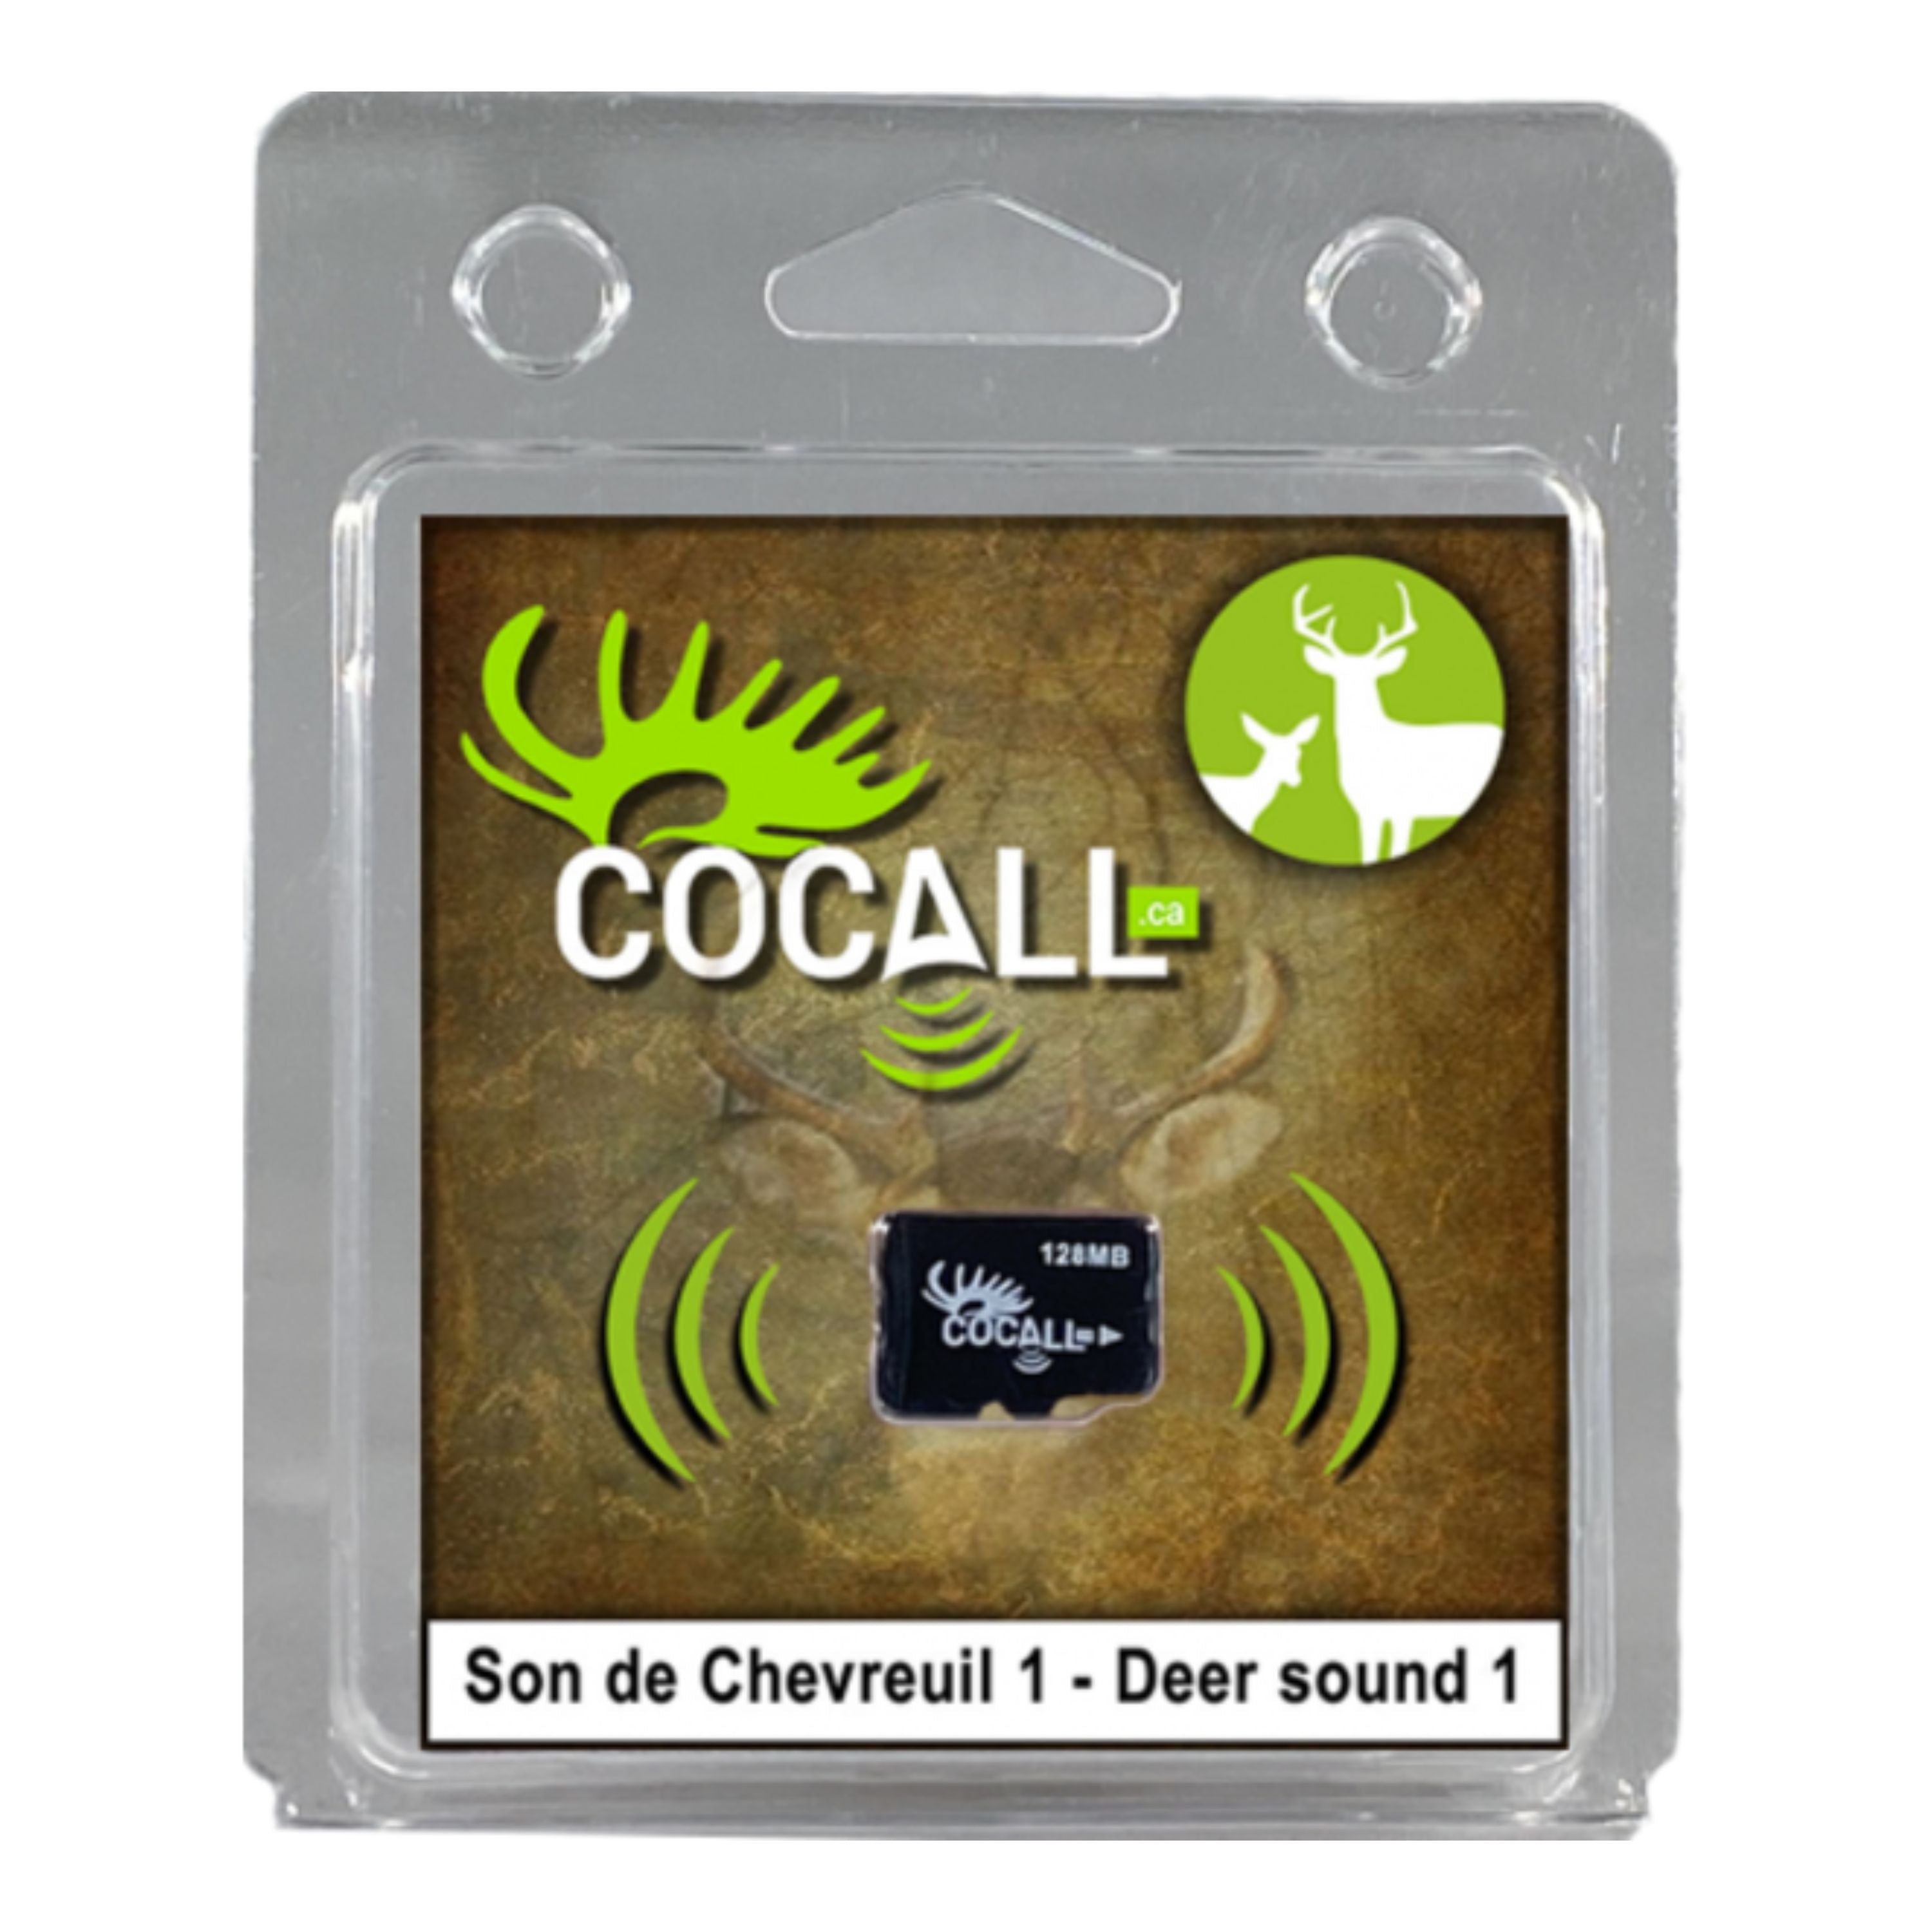 Deer card for Cocall2